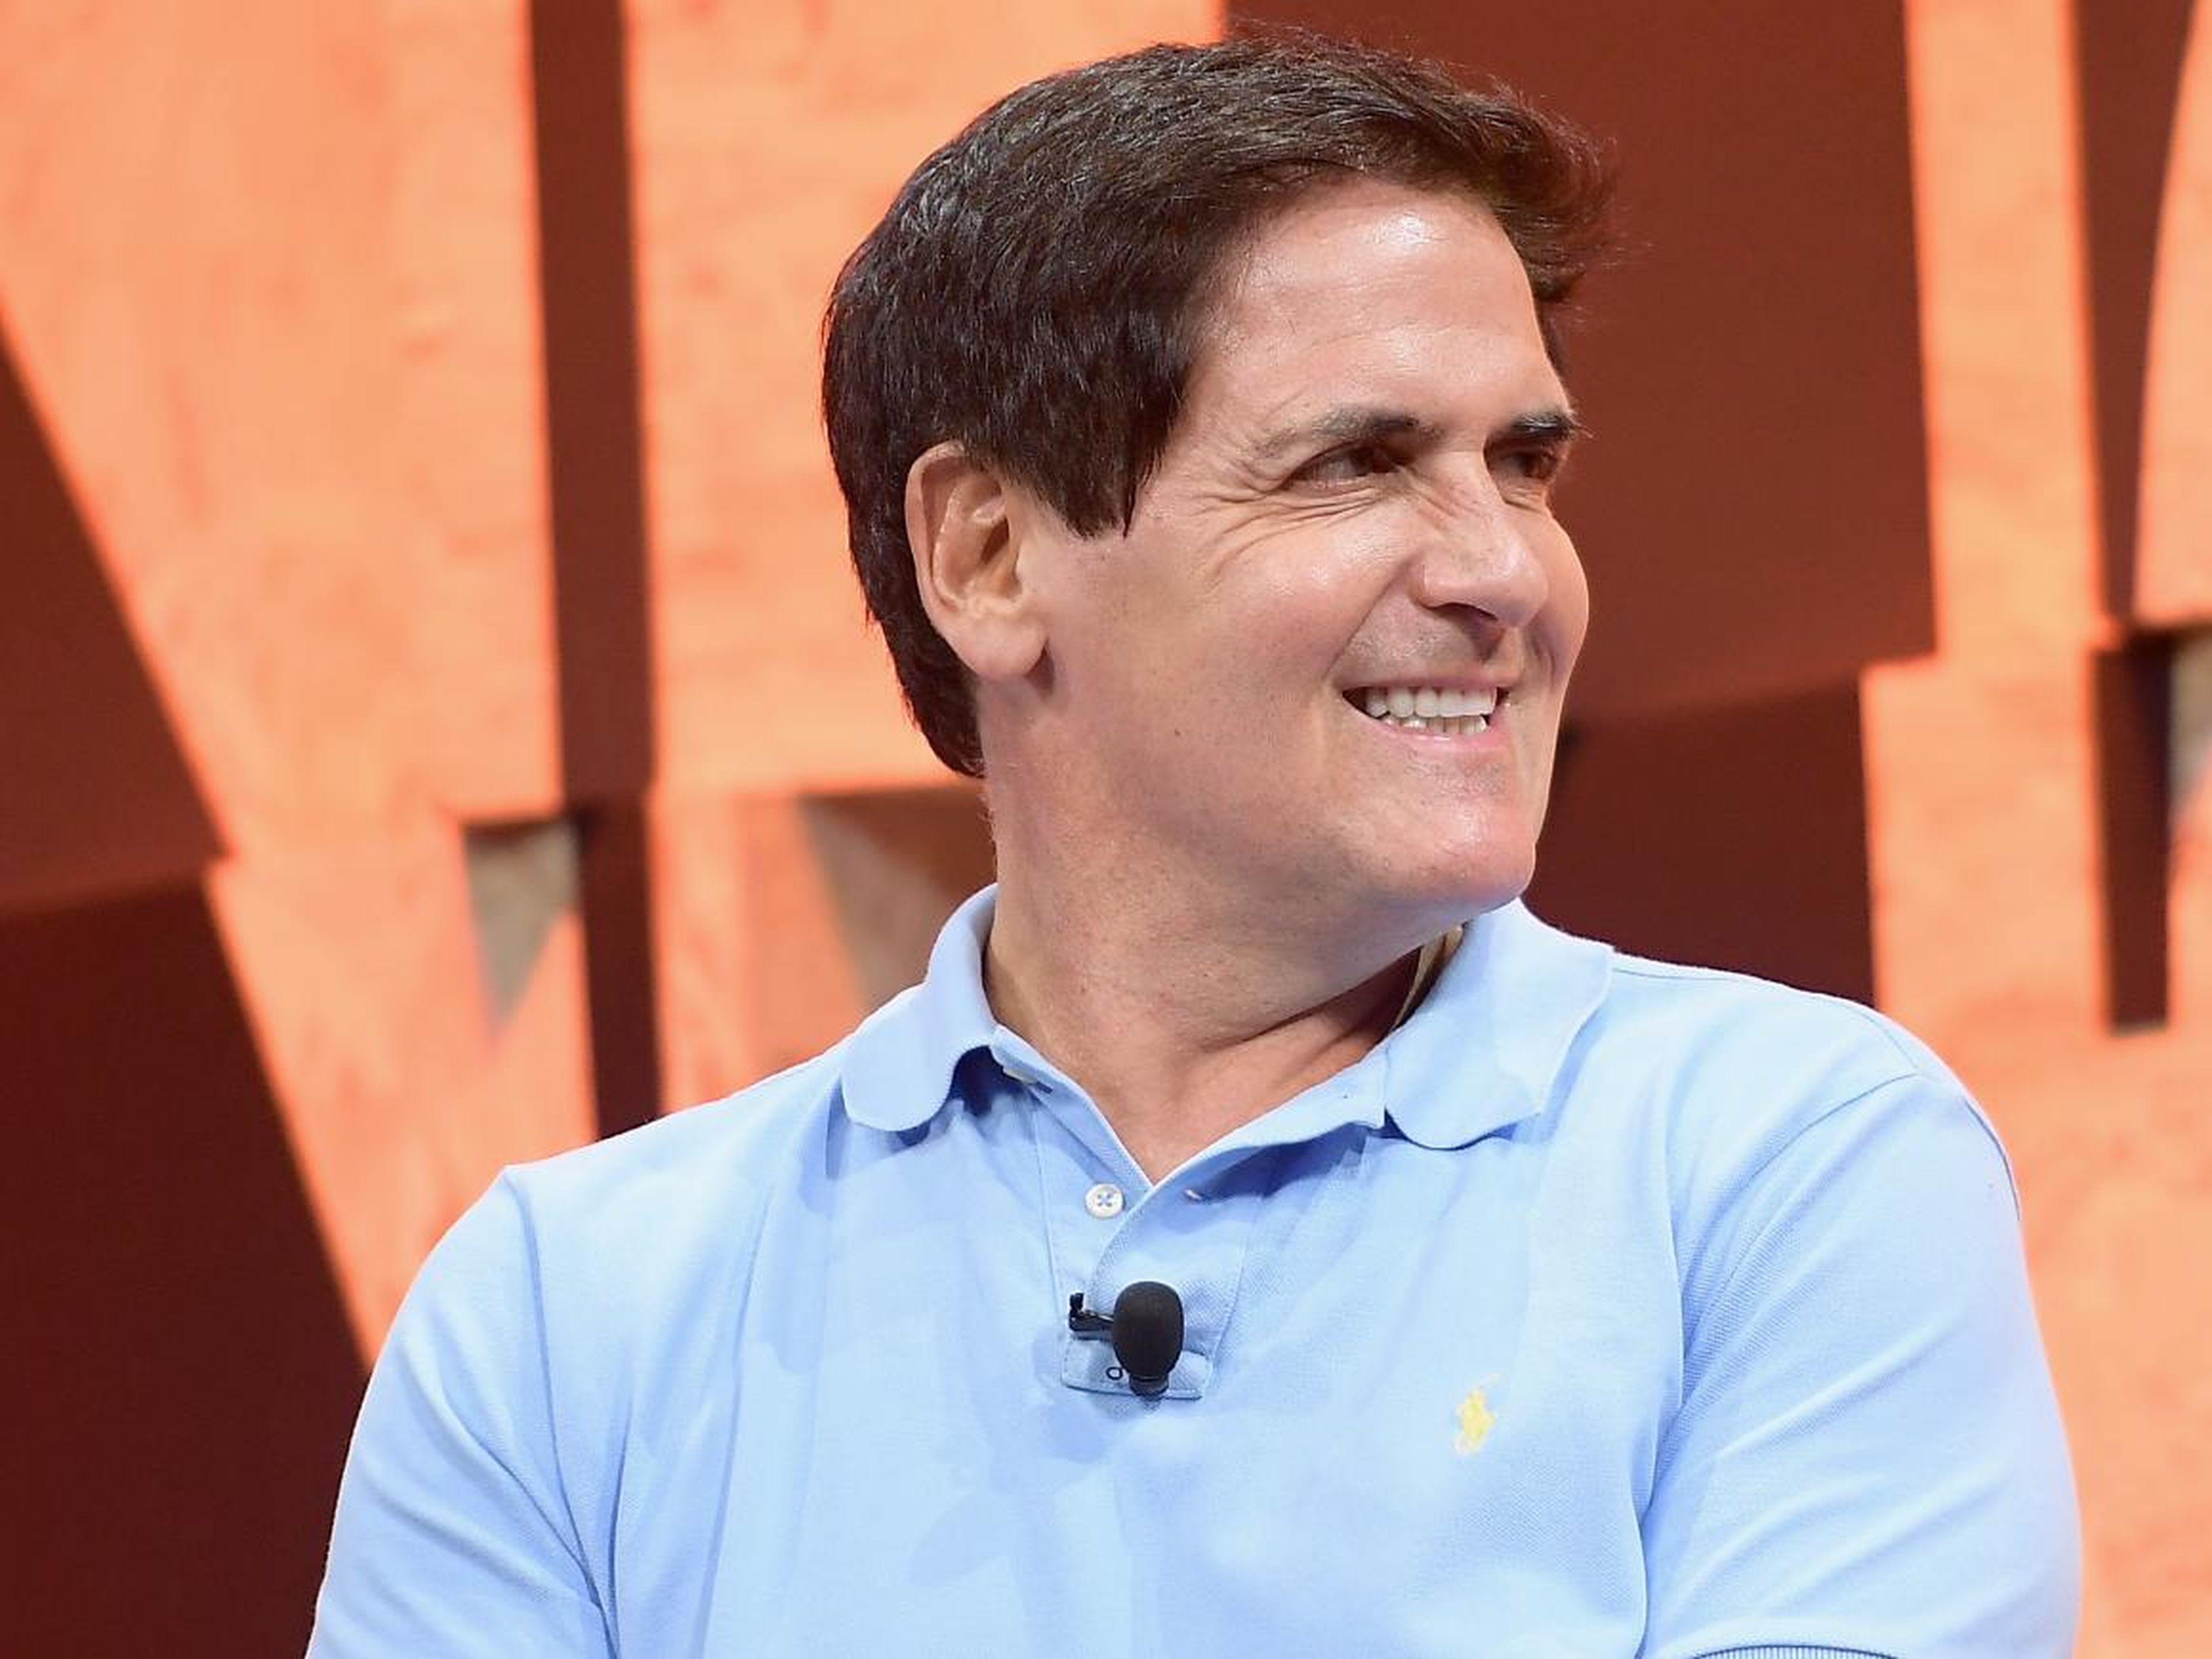 Businessman and investor Mark Cuban often reads for 3 hours a day to learn more about the industries he's working in.